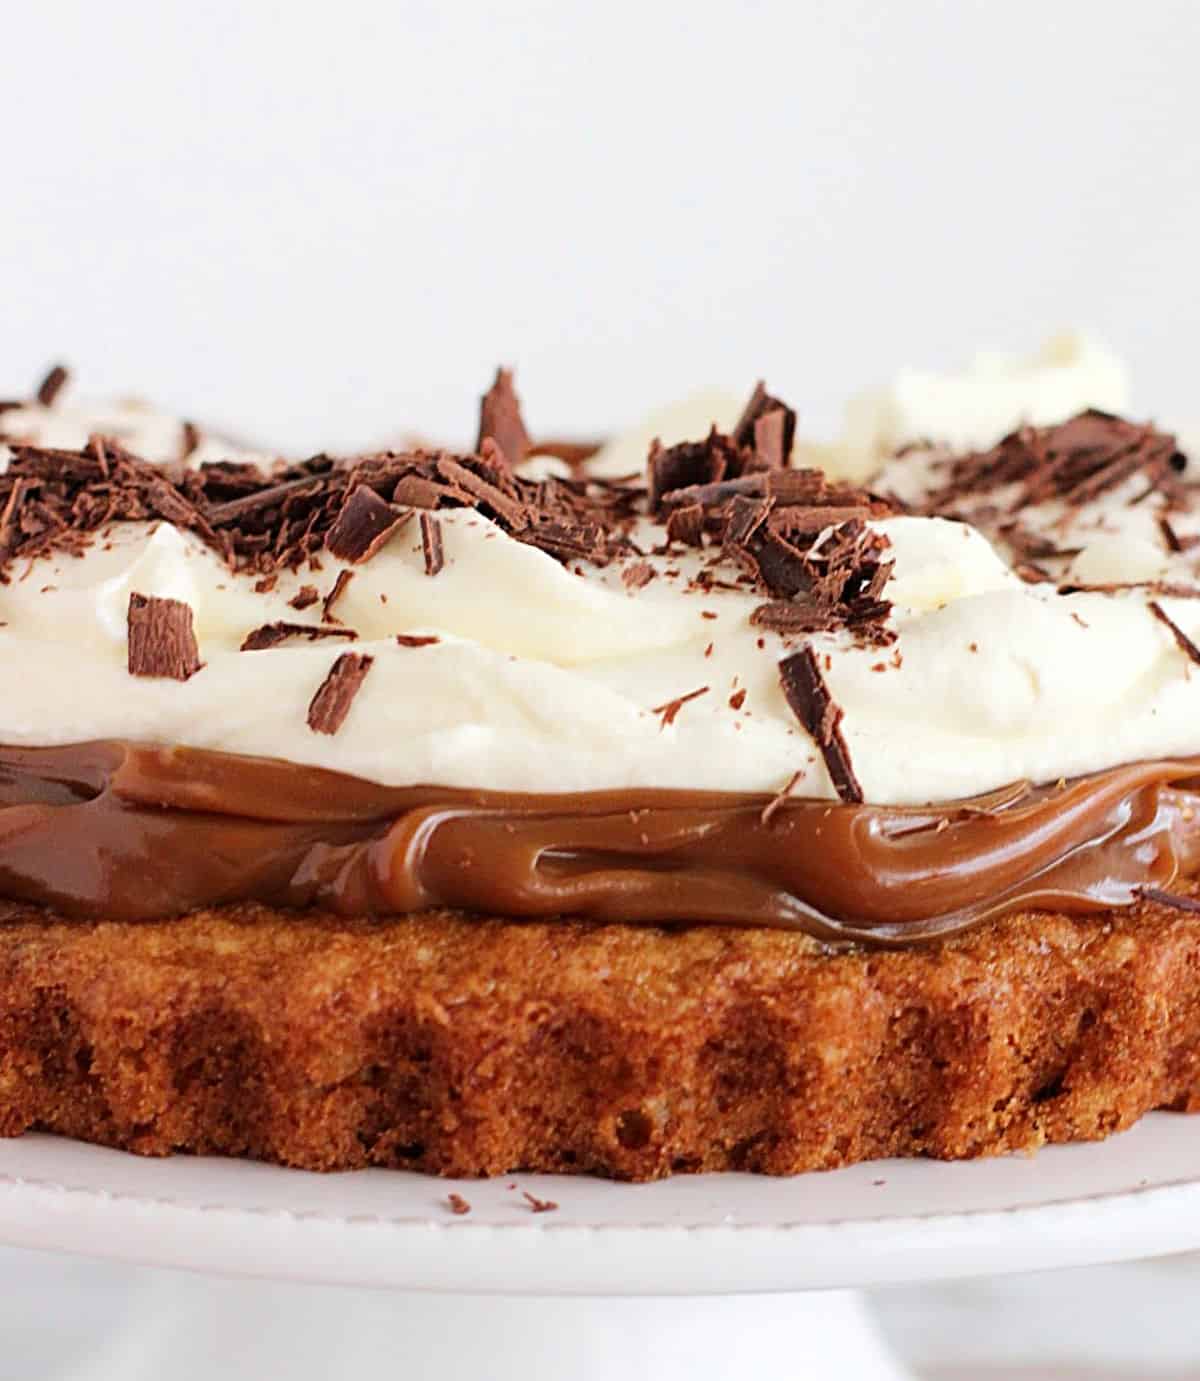 Middle section of banoffee cake photographed with white background